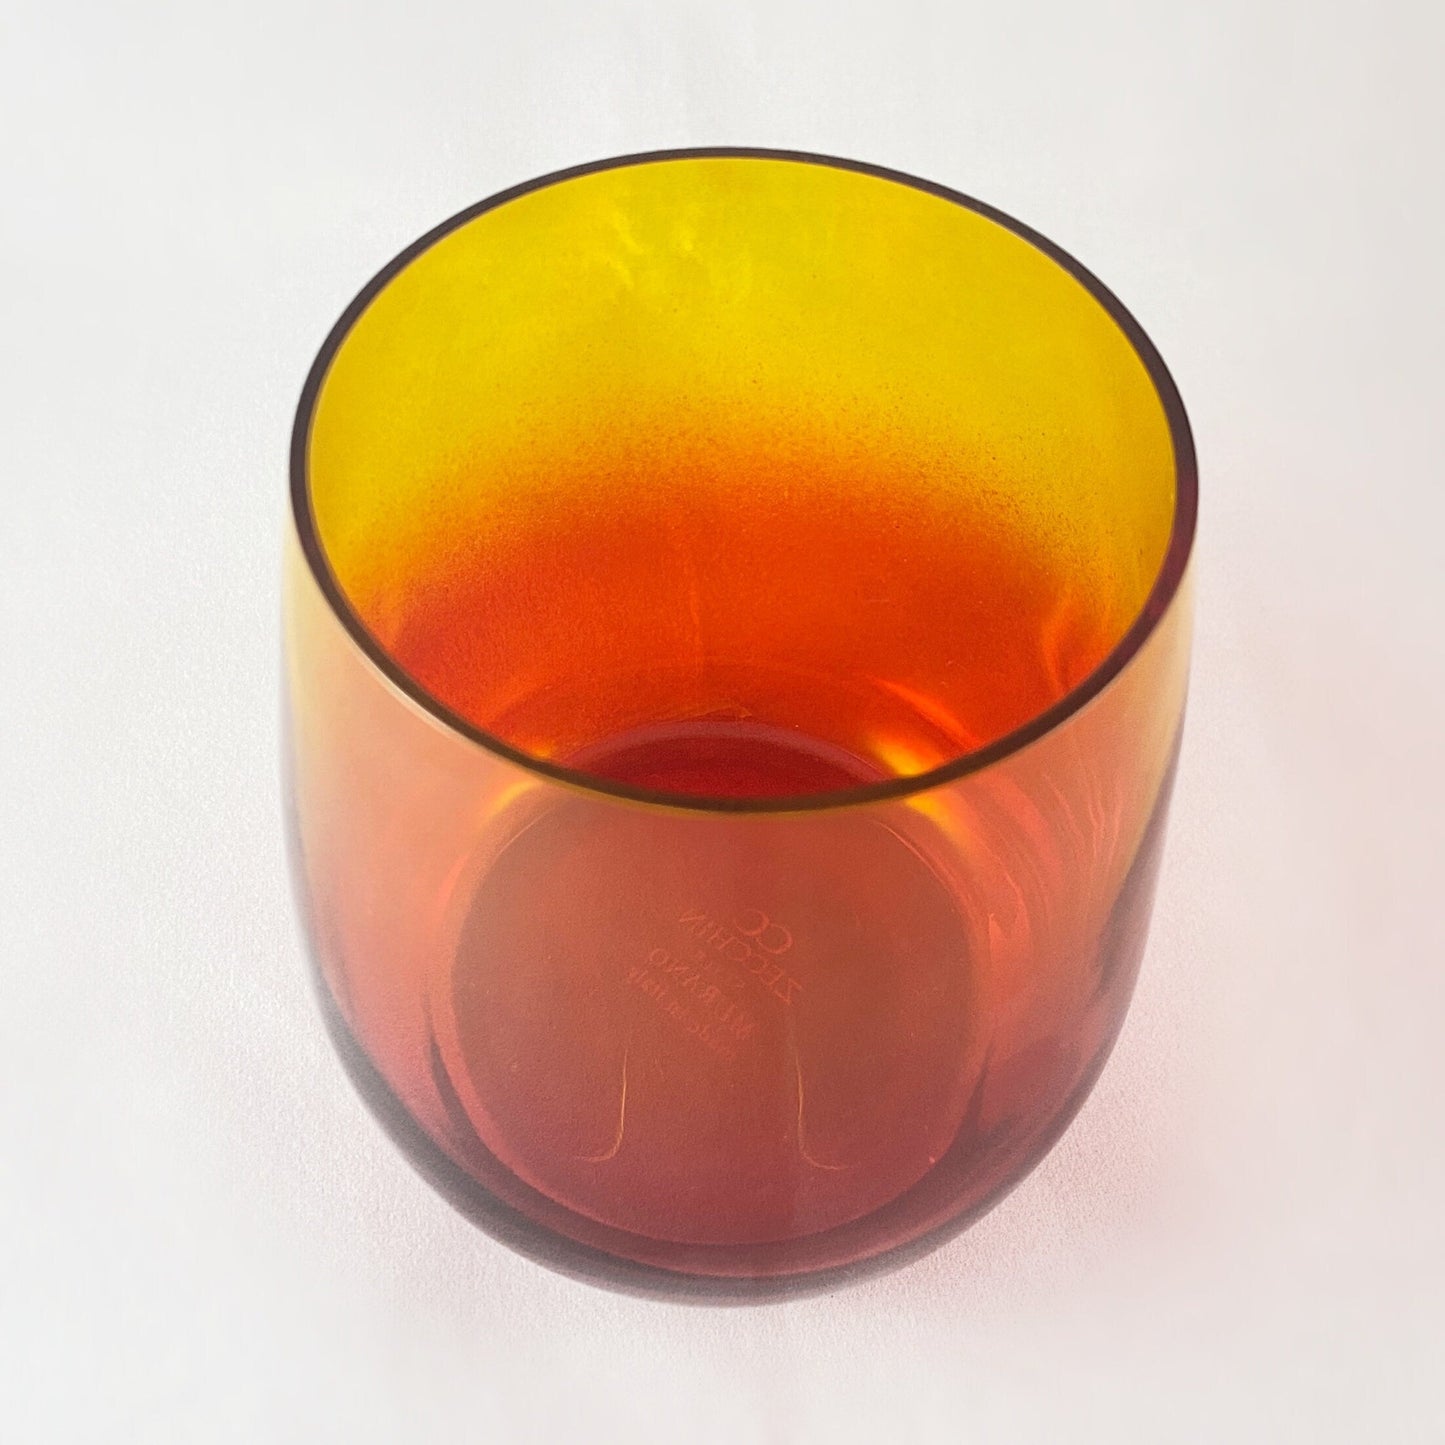 Yellow/Red Ombre Gradient Stemless Venetian Wine Glass - Handmade in Italy, Colorful Murano Glass